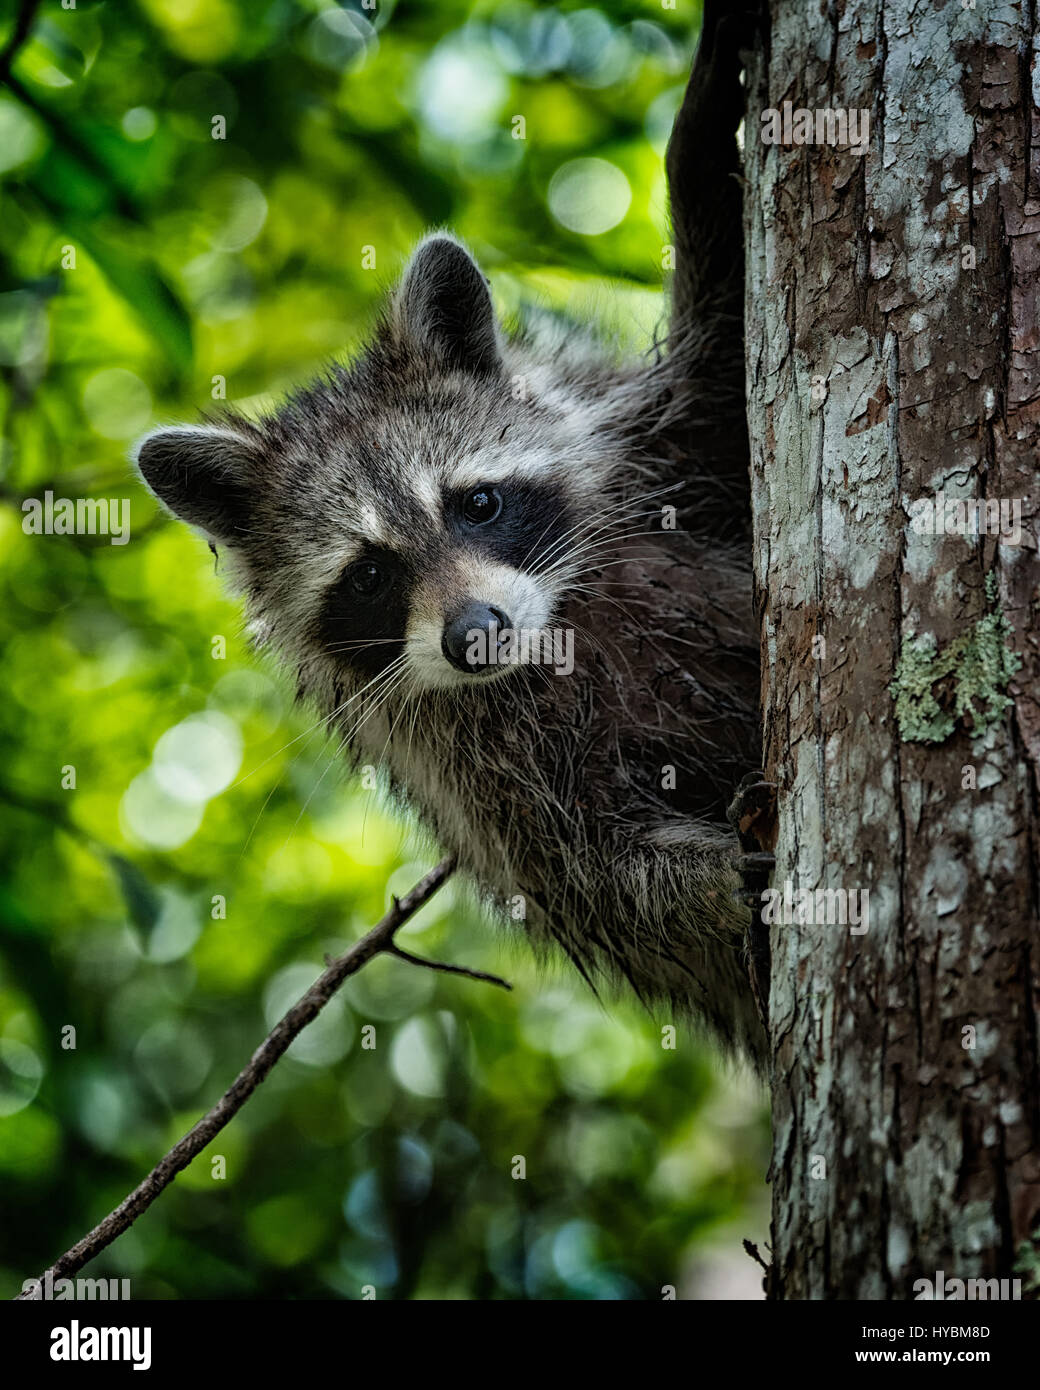 This little guy was first fleeing up on a tree in the forest, but was then very curiously observing me from his save place.|Florida Raccoon (Procyon lotor elucus) Stock Photo